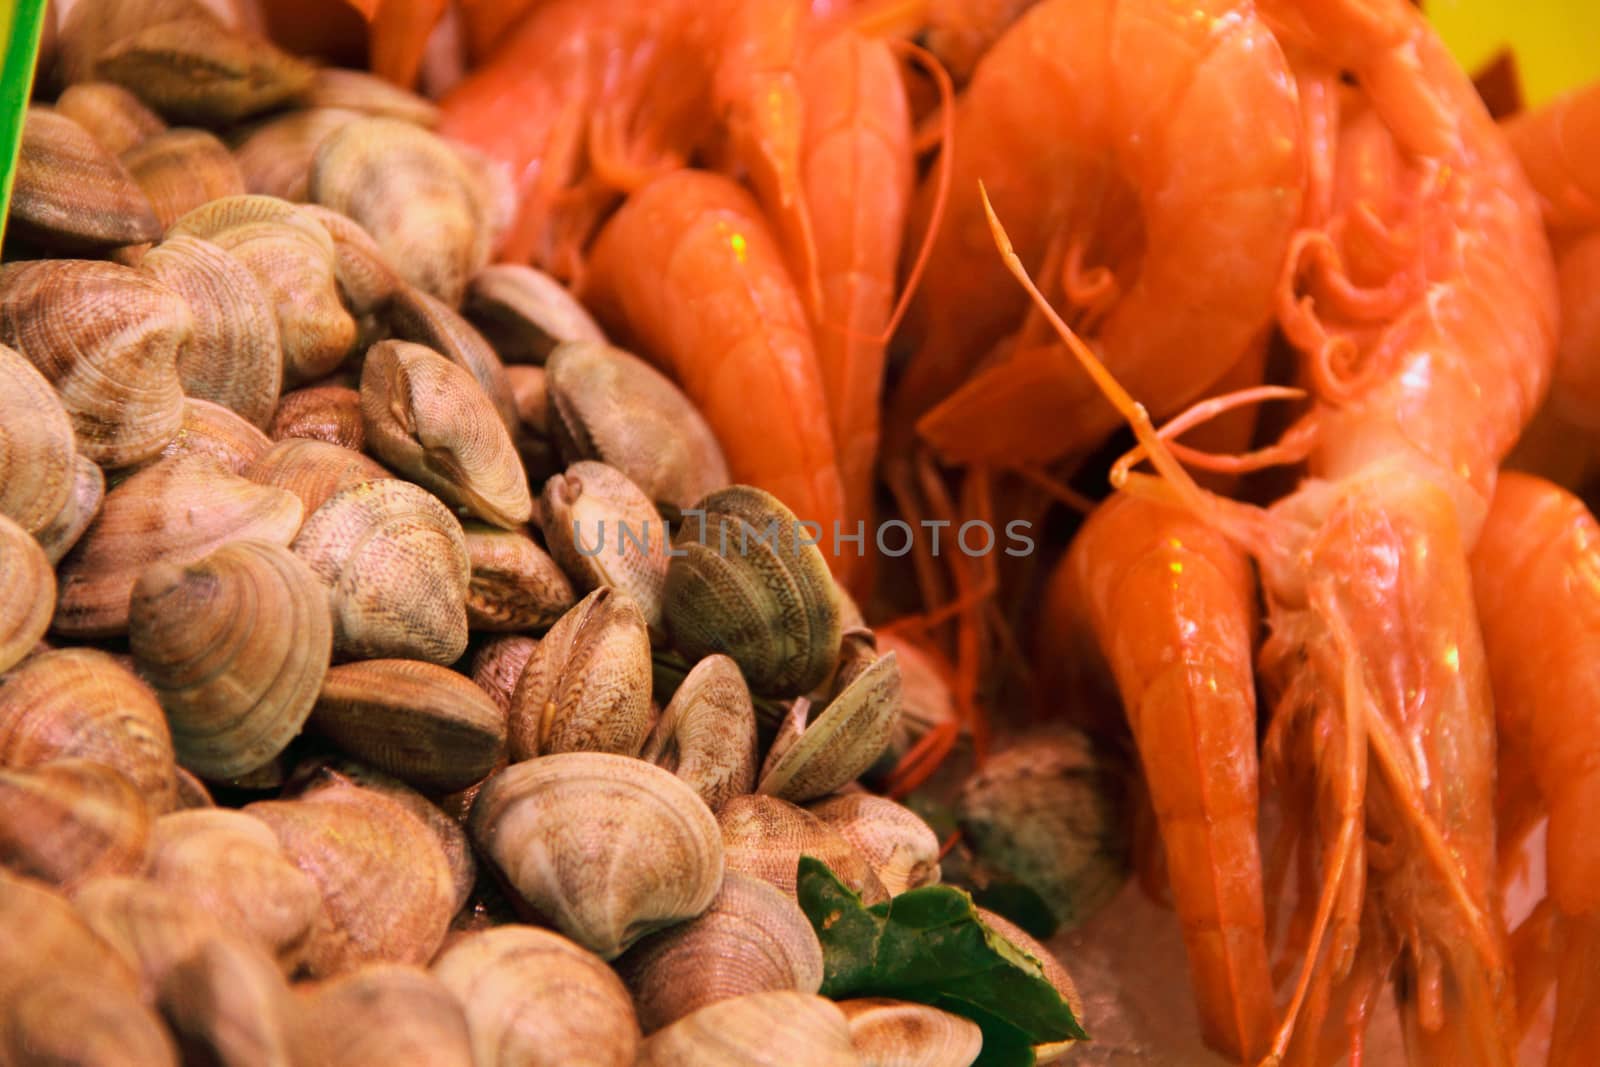 Raw fresh clams vongole seashells and shrimps background close-up at market